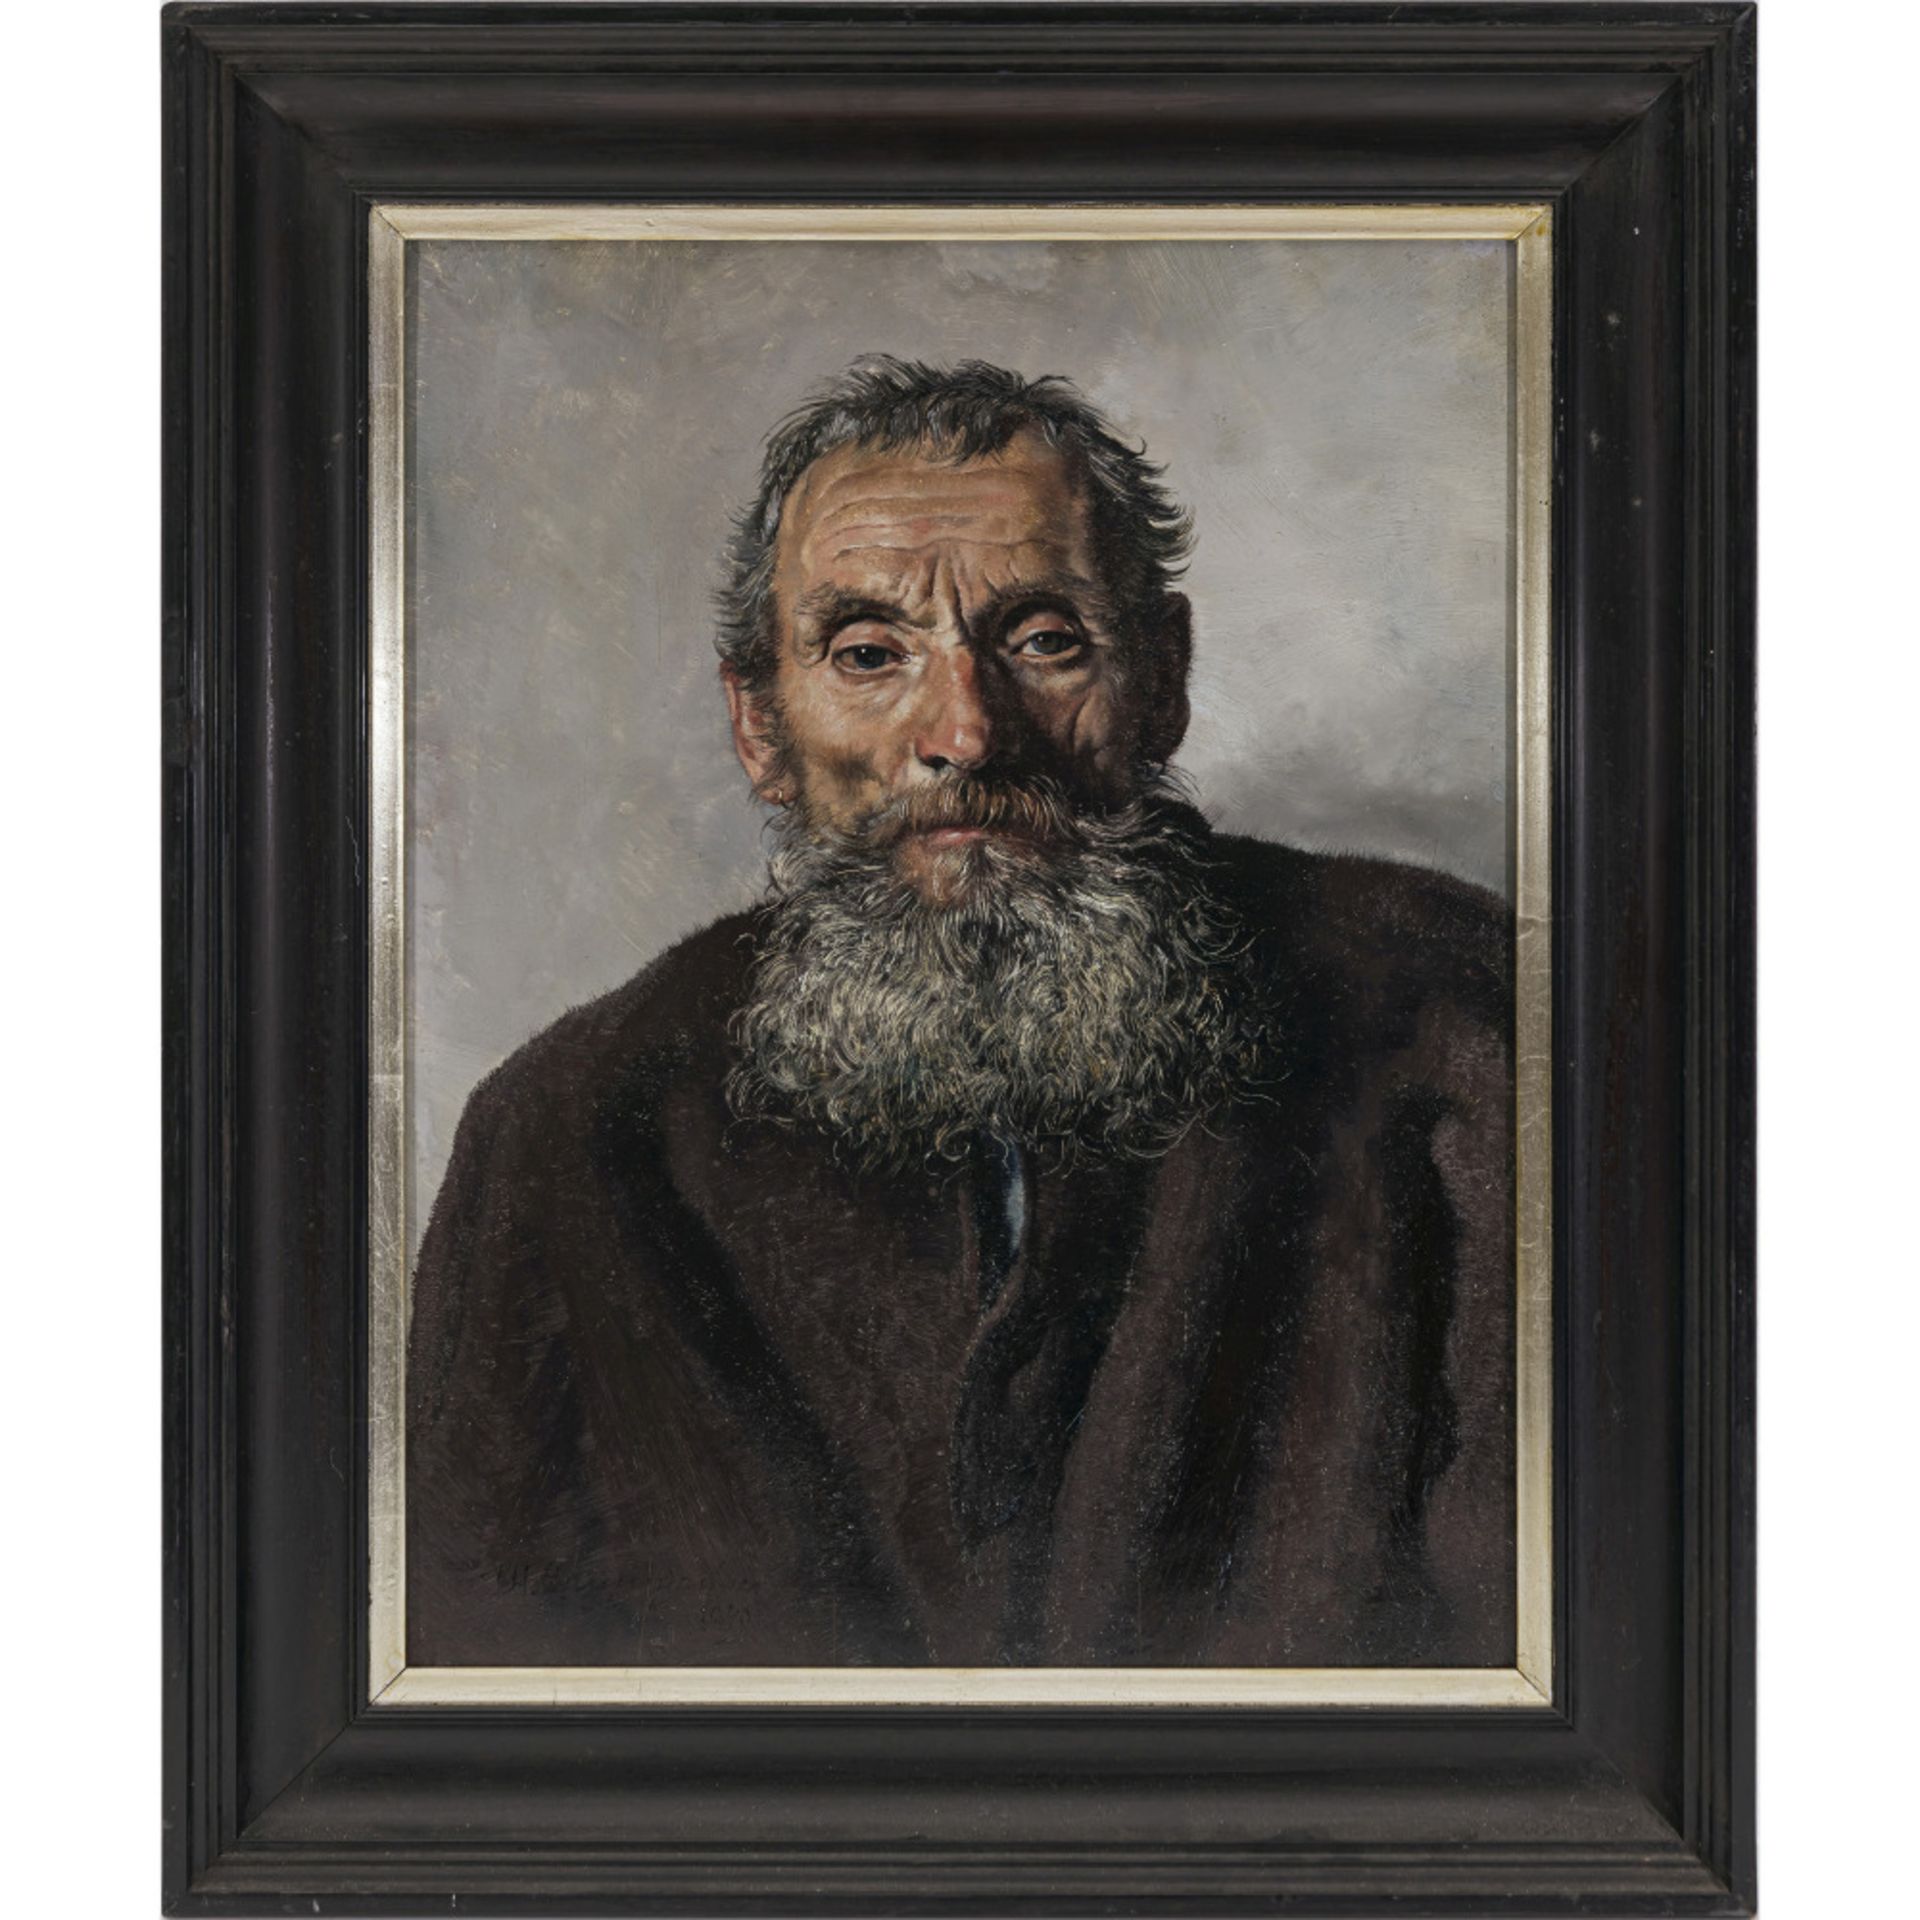 Thomas Baumgartner - Portrait of an old man with a beard - Image 2 of 2